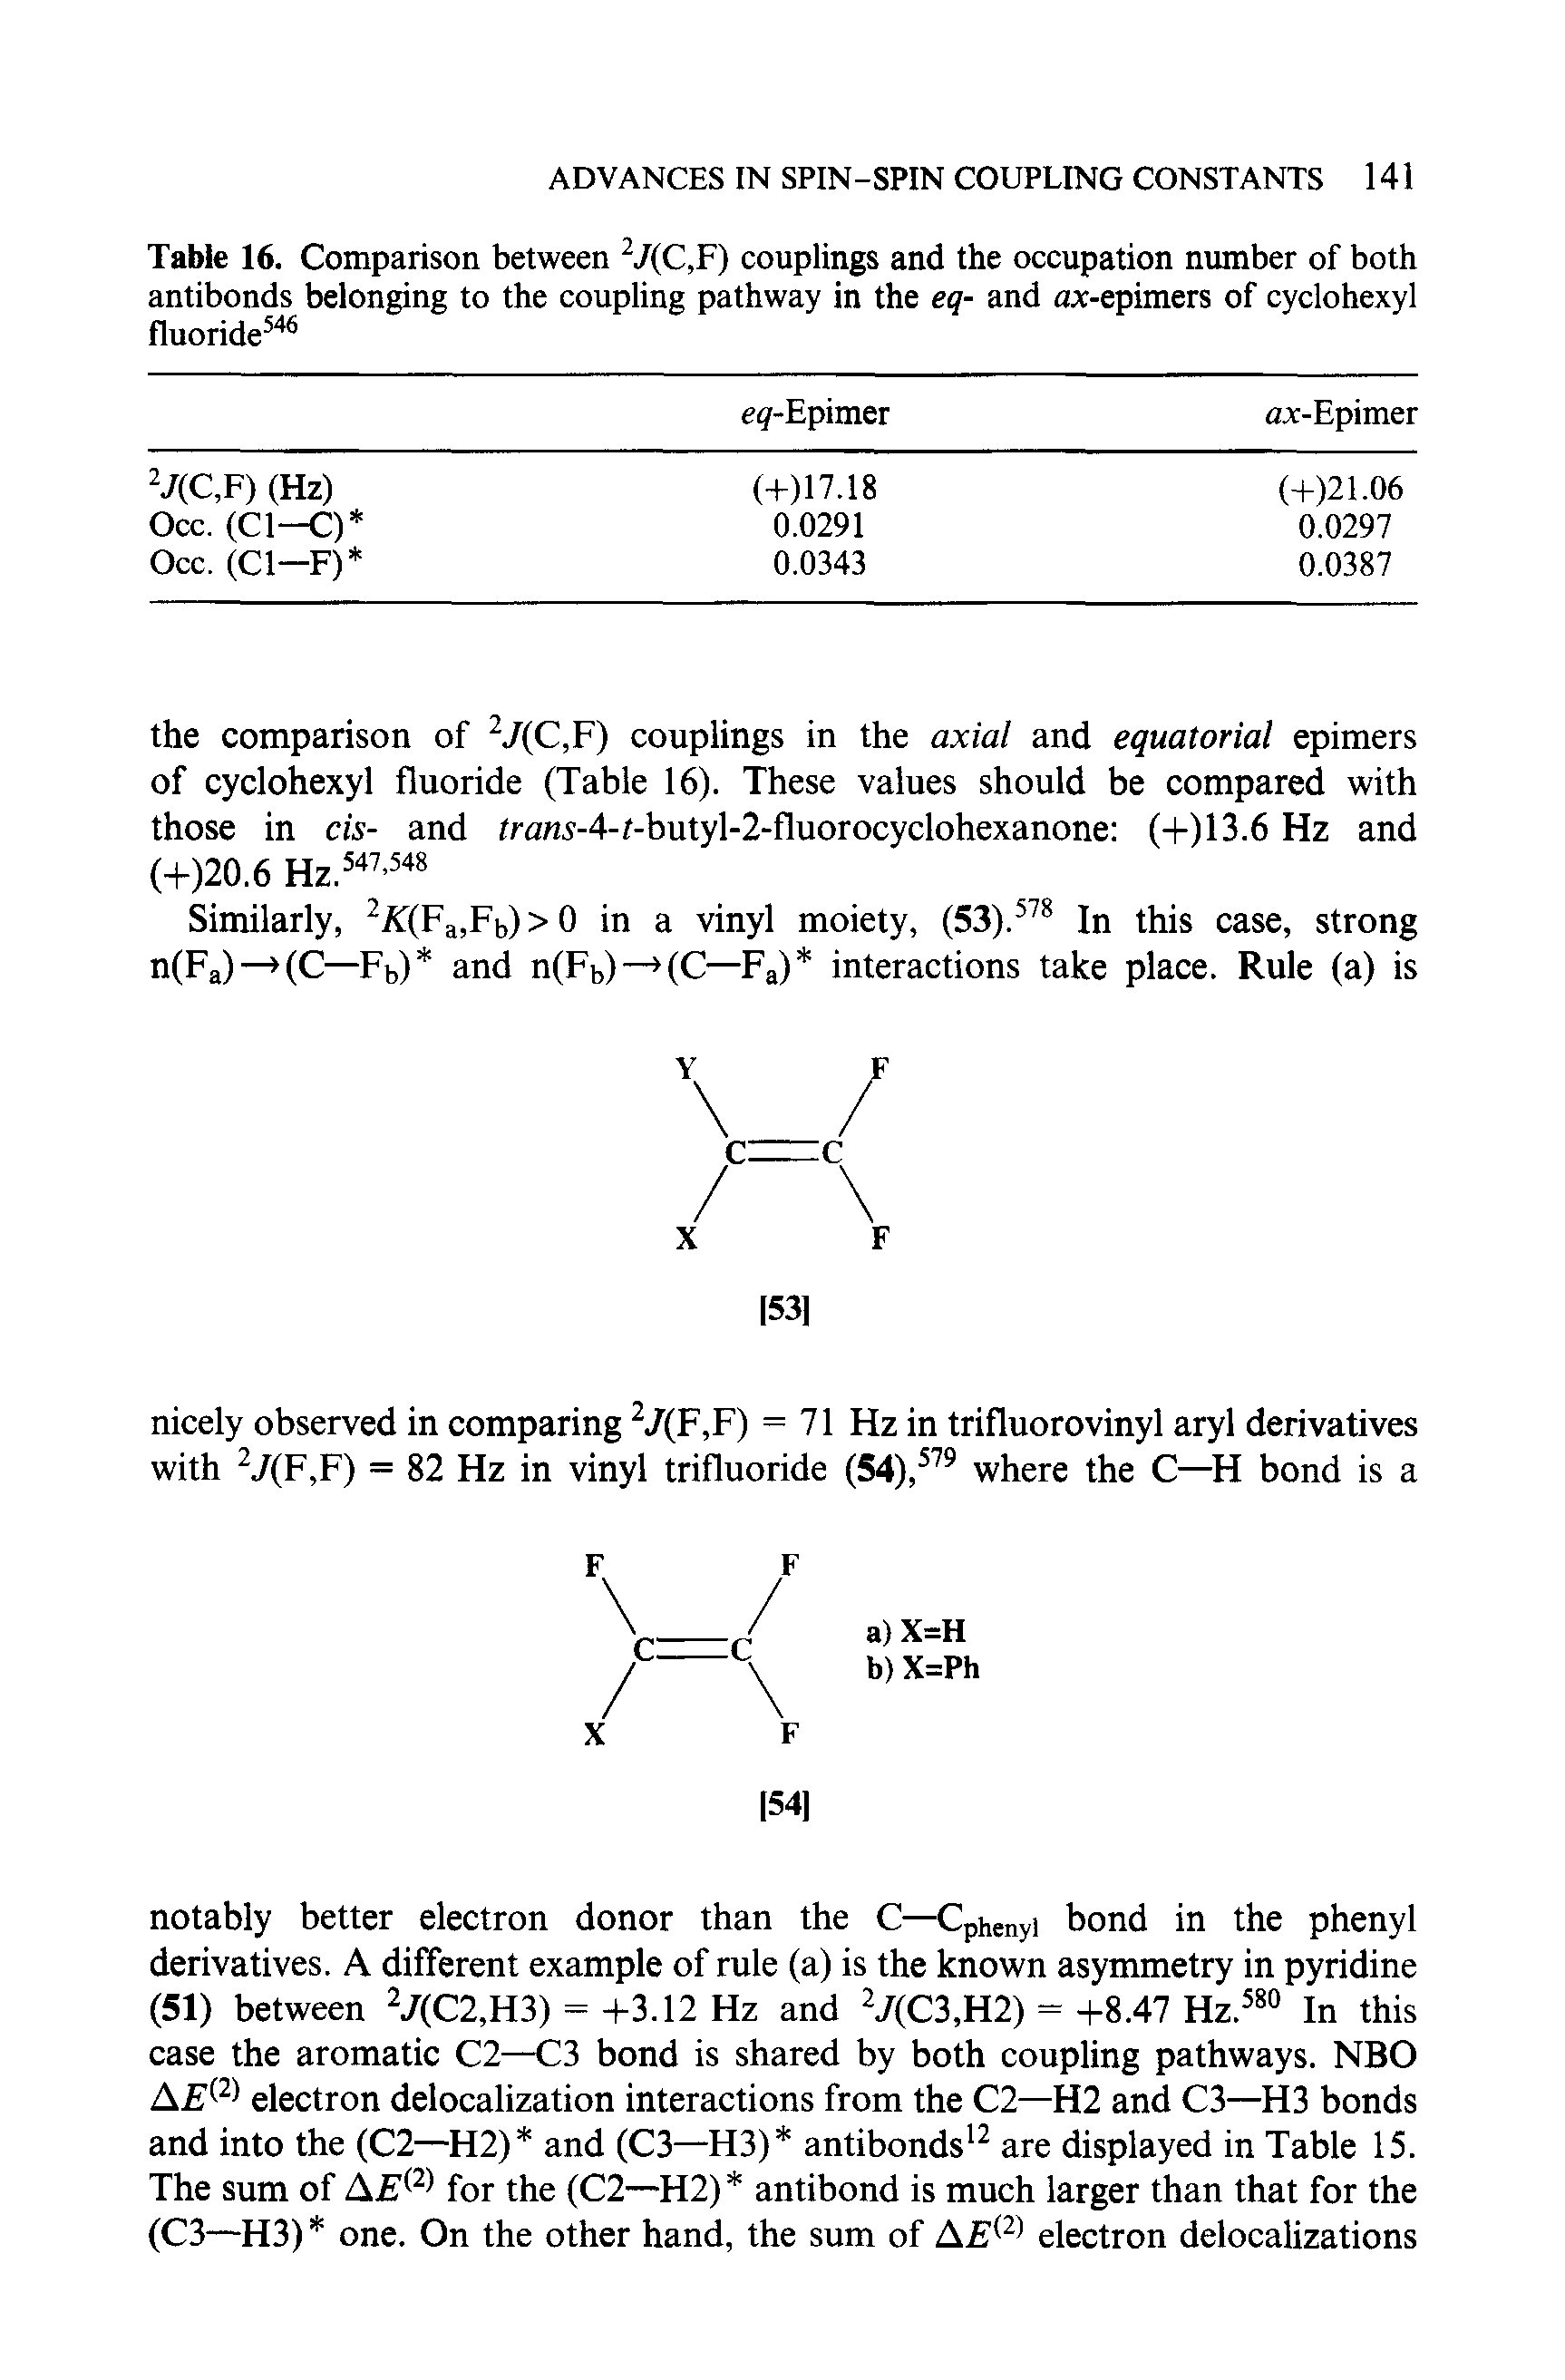 Table 16. Comparison between V(C,F) couplings and the occupation number of both antibonds belonging to the coupling pathway in the eq- and ax-epimers of cyclohexyl fluoride ...